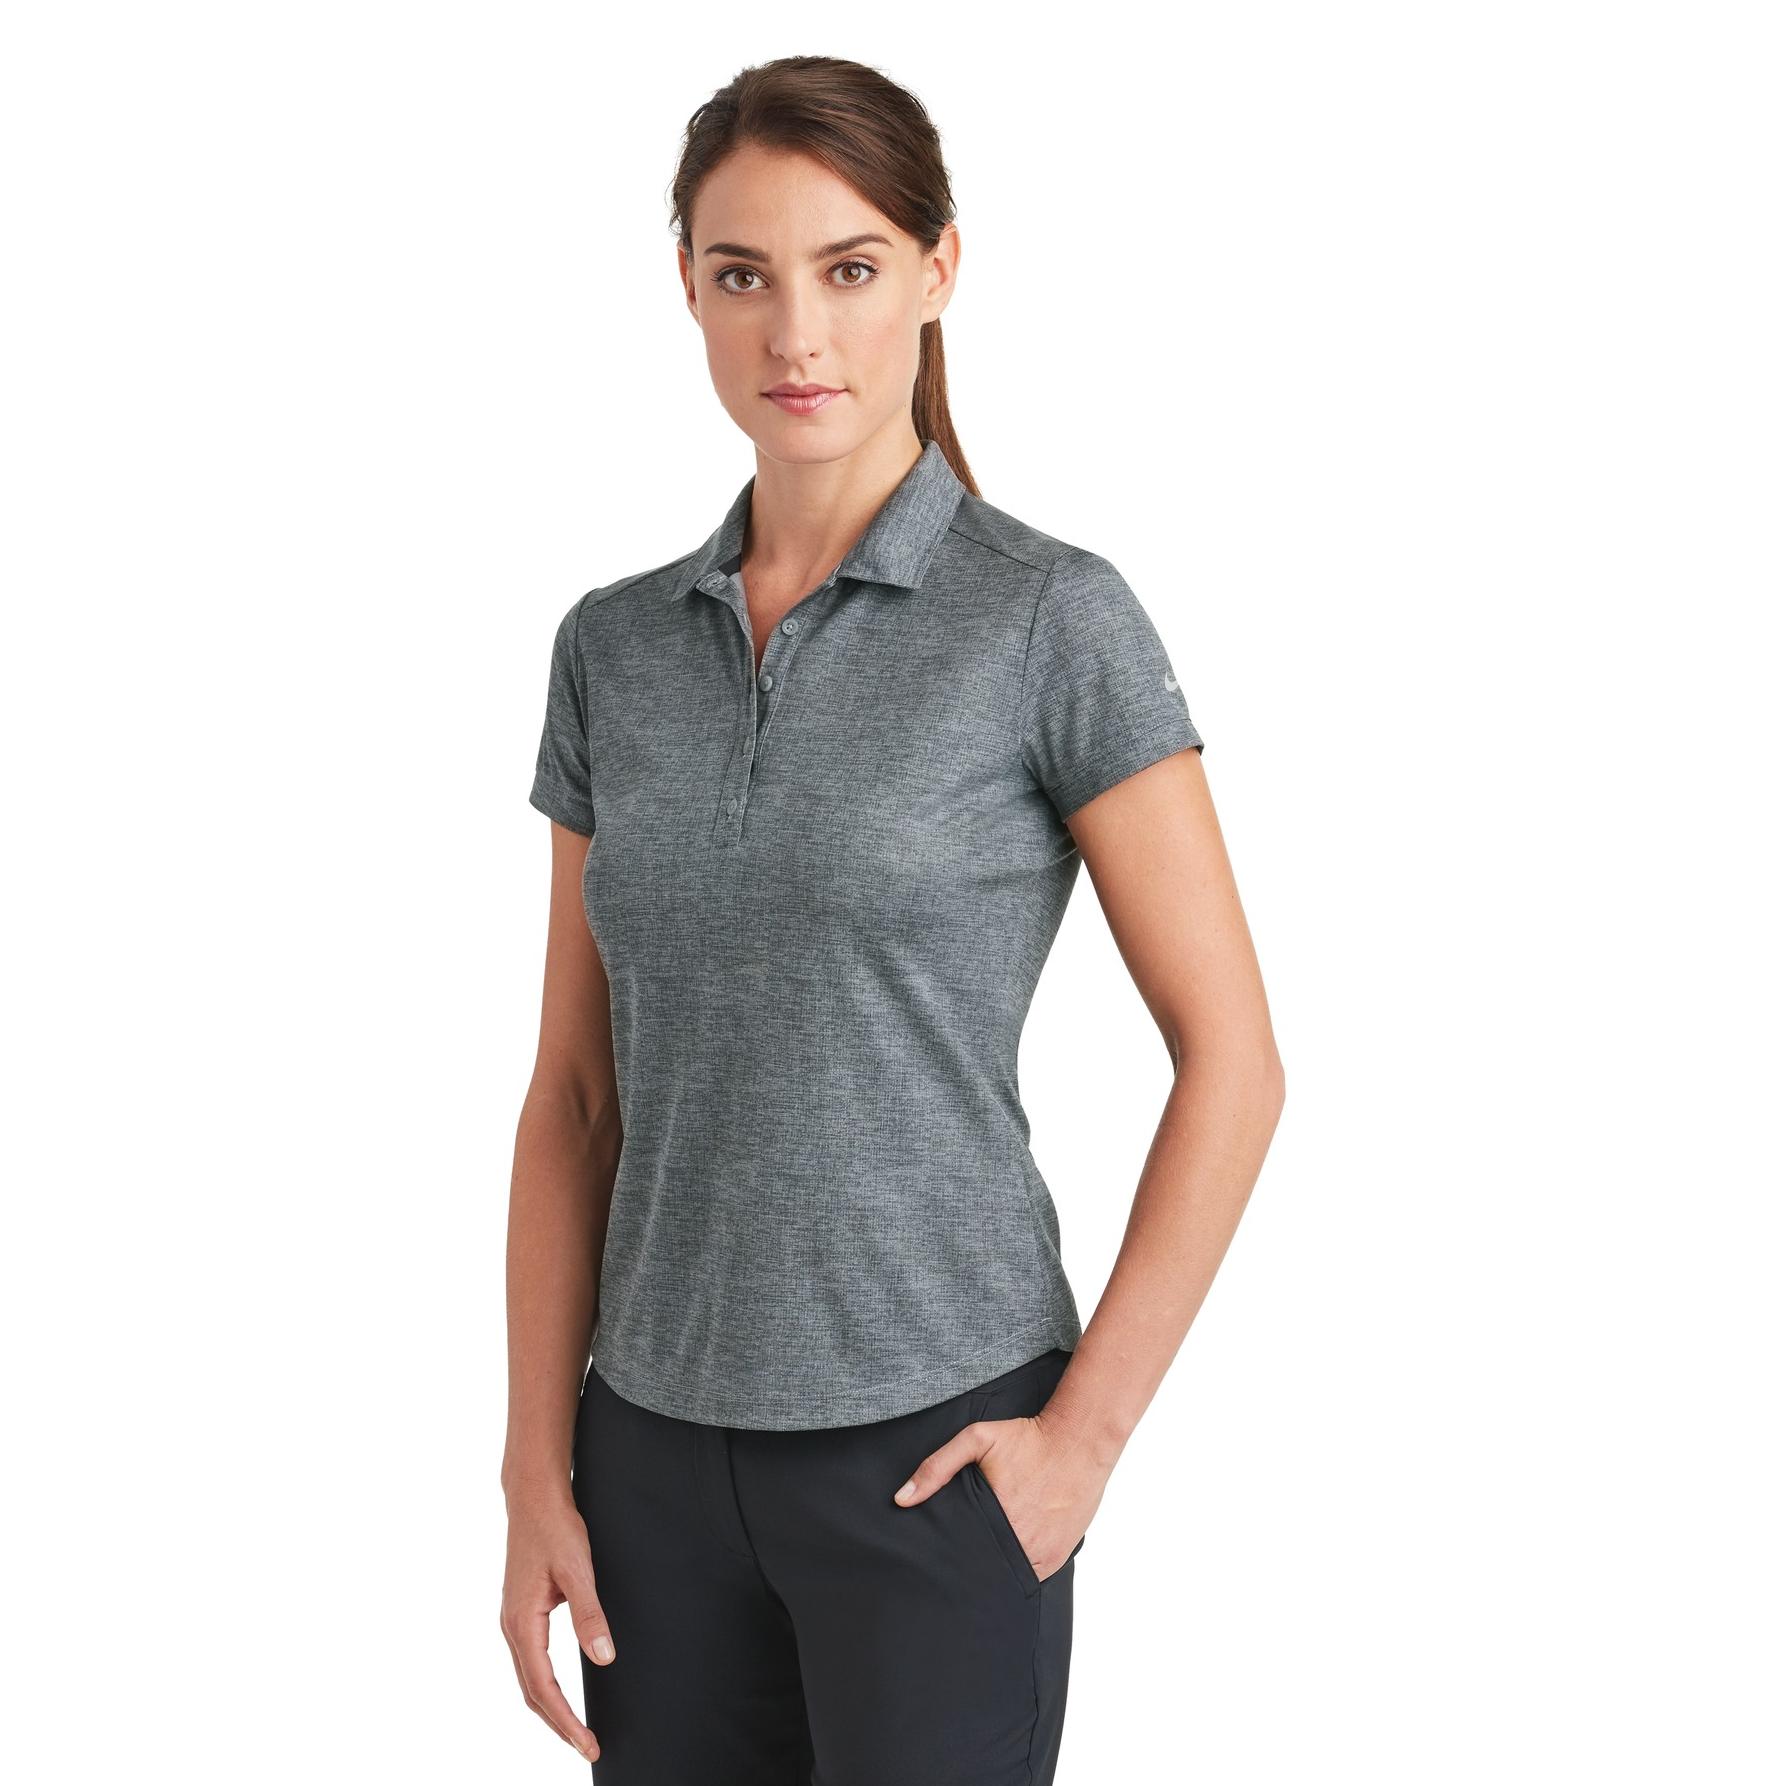 Nike 838961 Ladies Dri-FIT Crosshatch Polo - Cool Grey/Anthracite ...